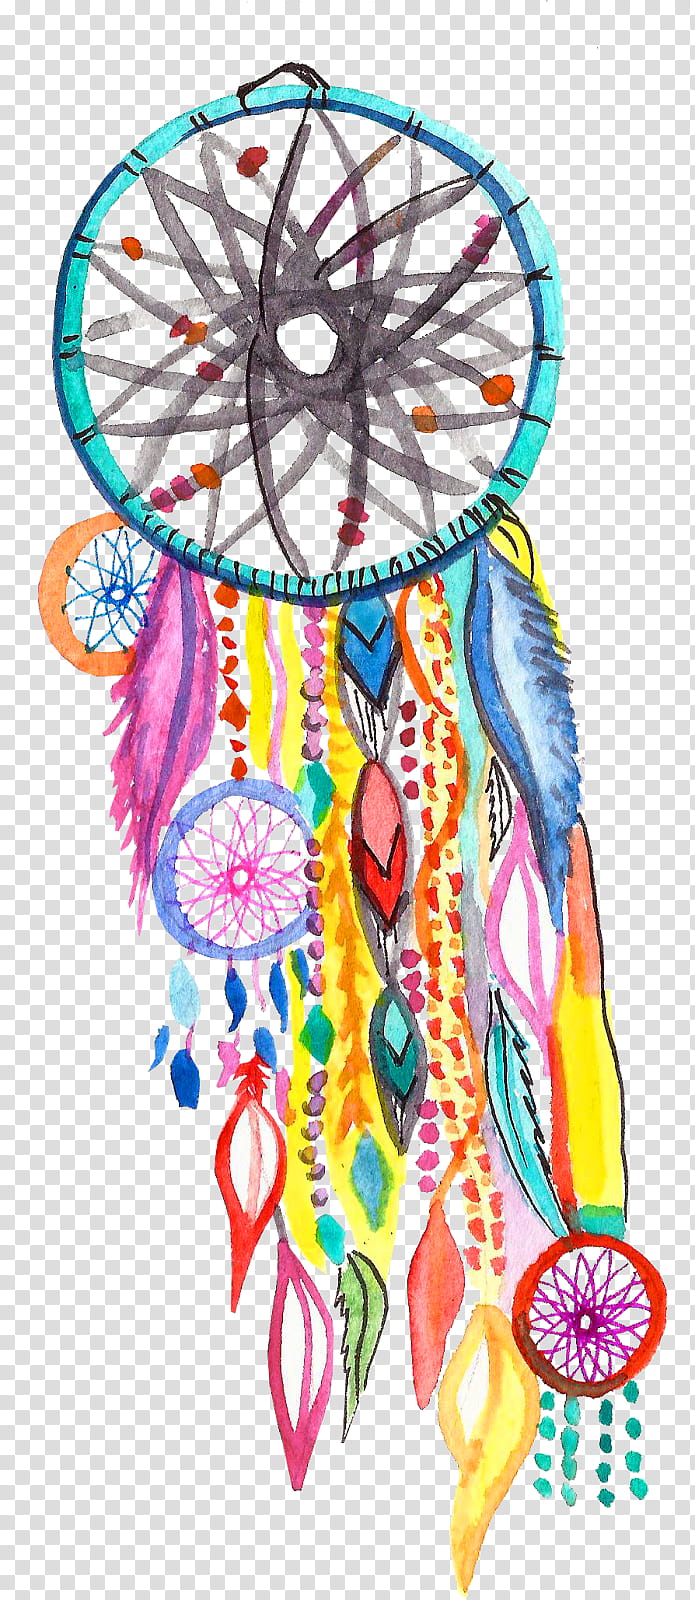 How to Draw a Dream Catcher - Easy Drawing Tutorial For Kids